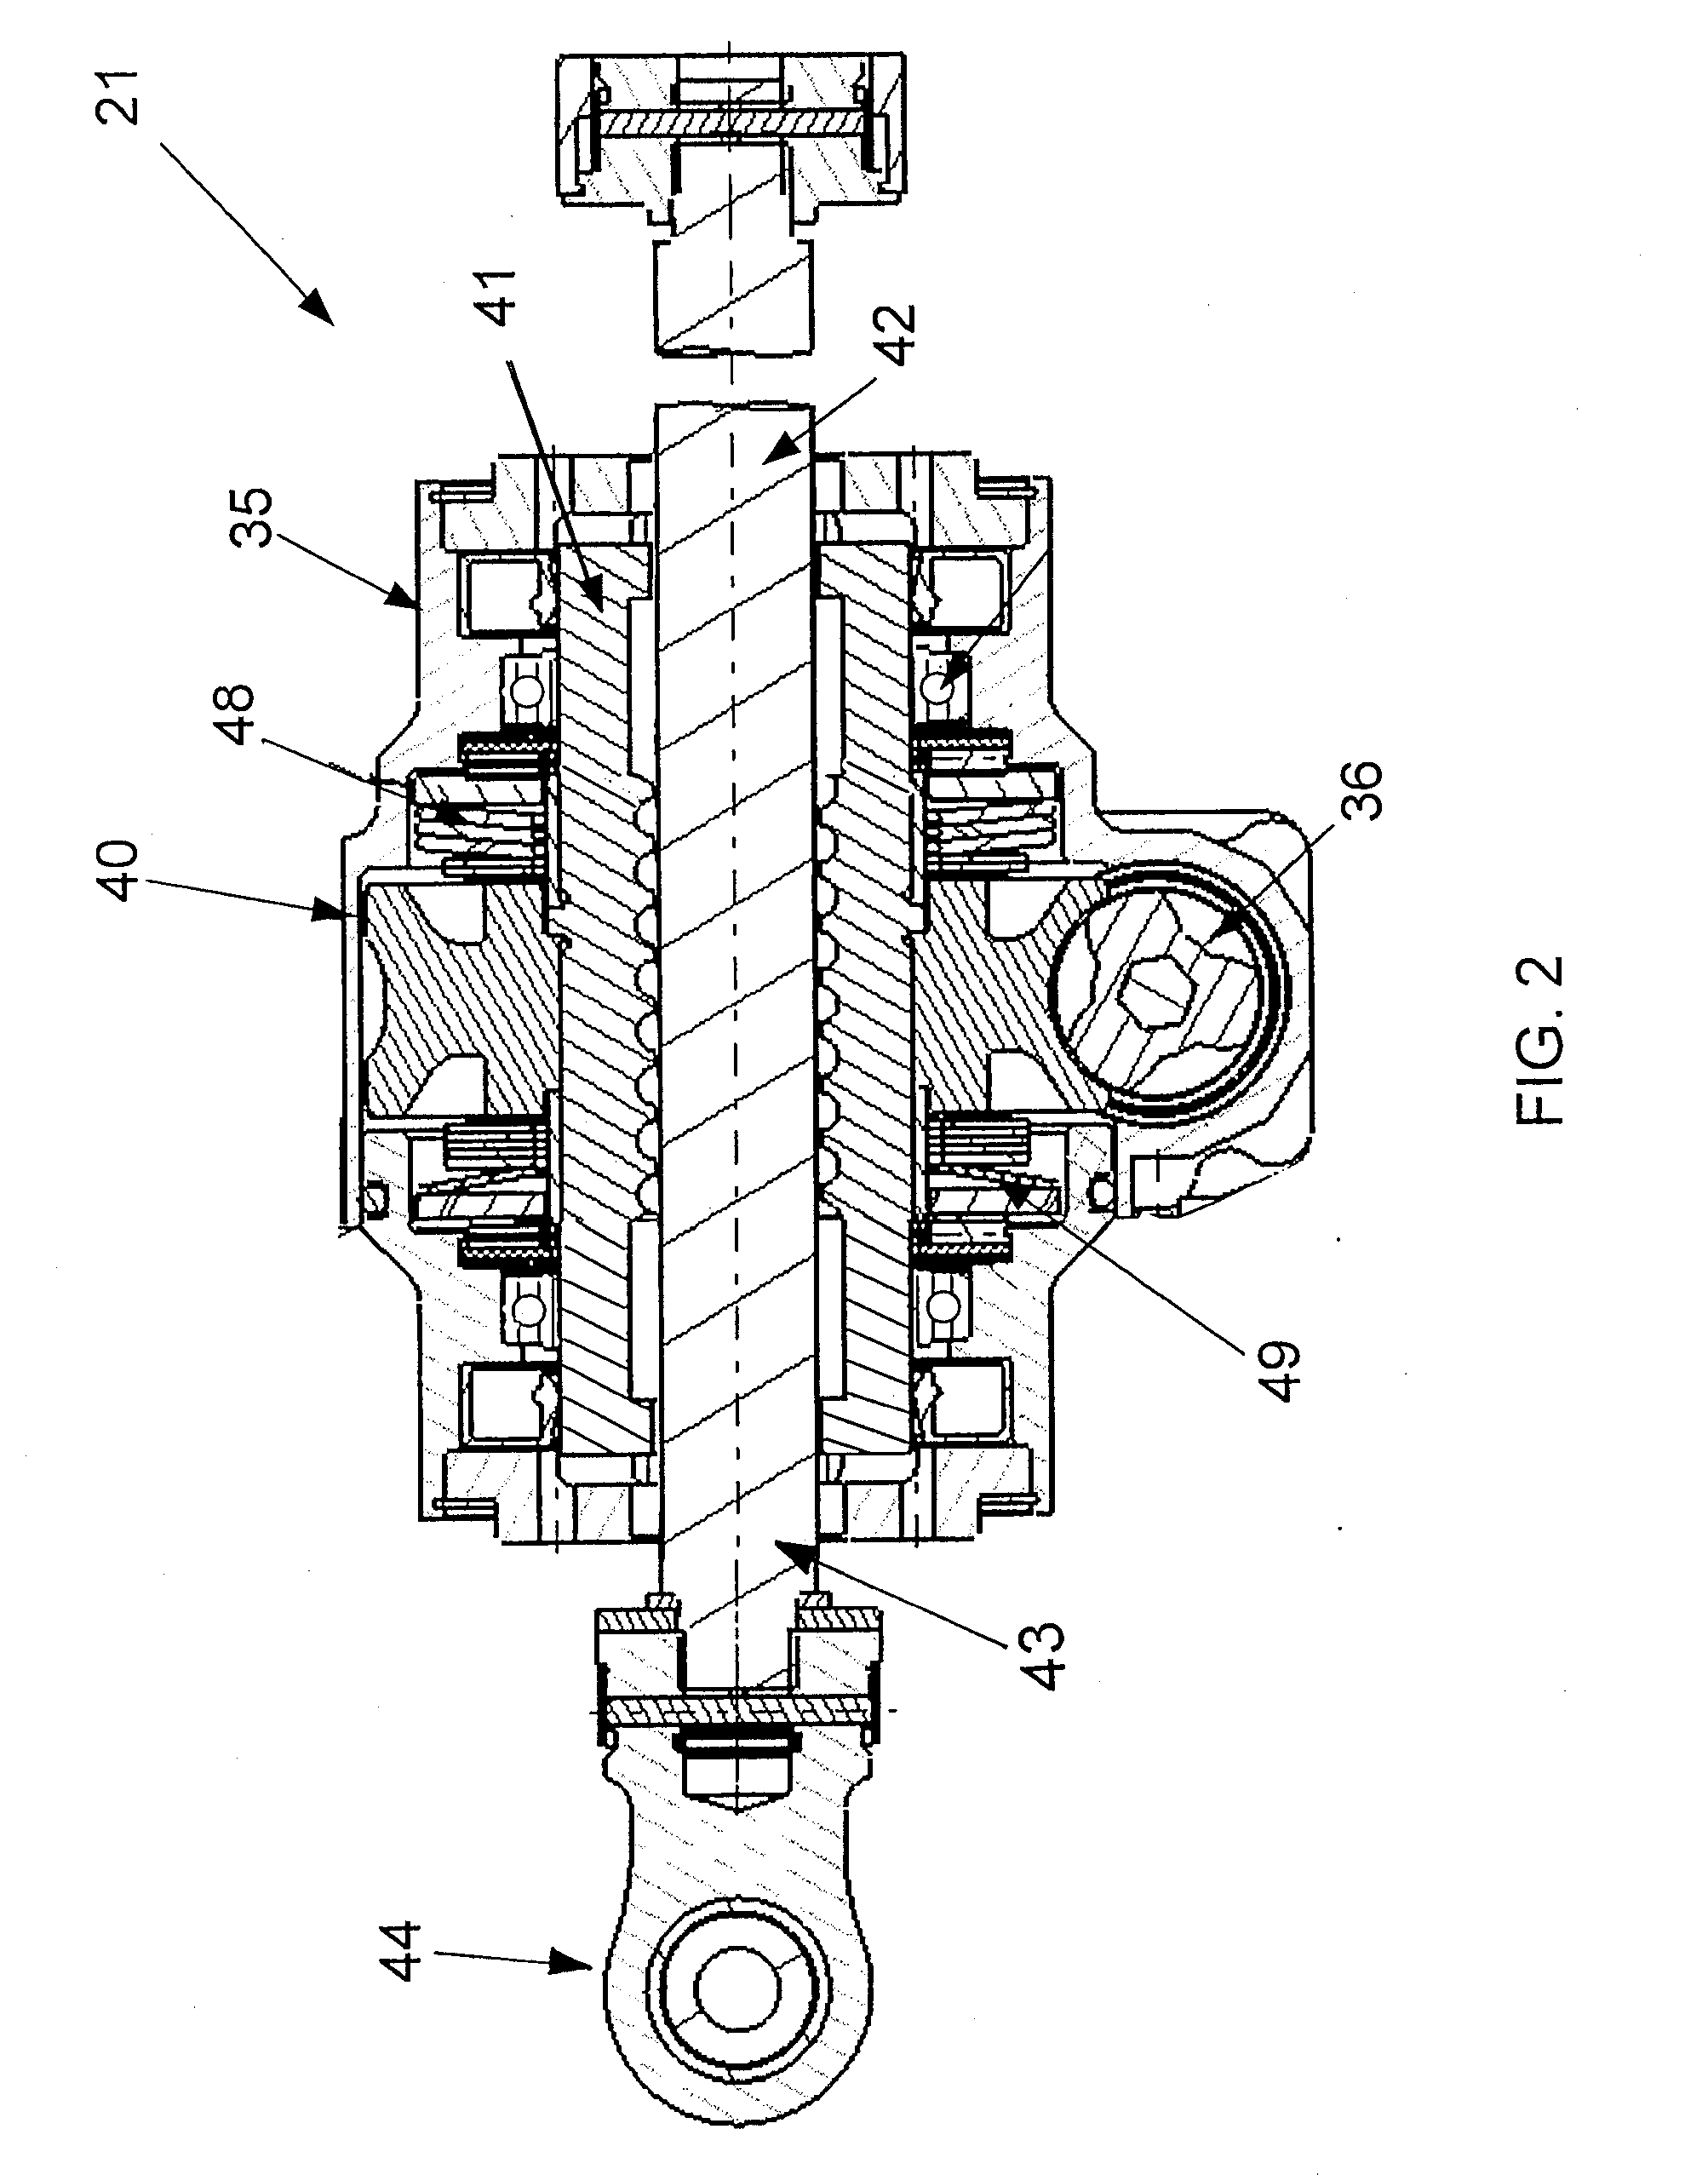 Aircraft flight control actuation system with direct acting, force limiting, actuator